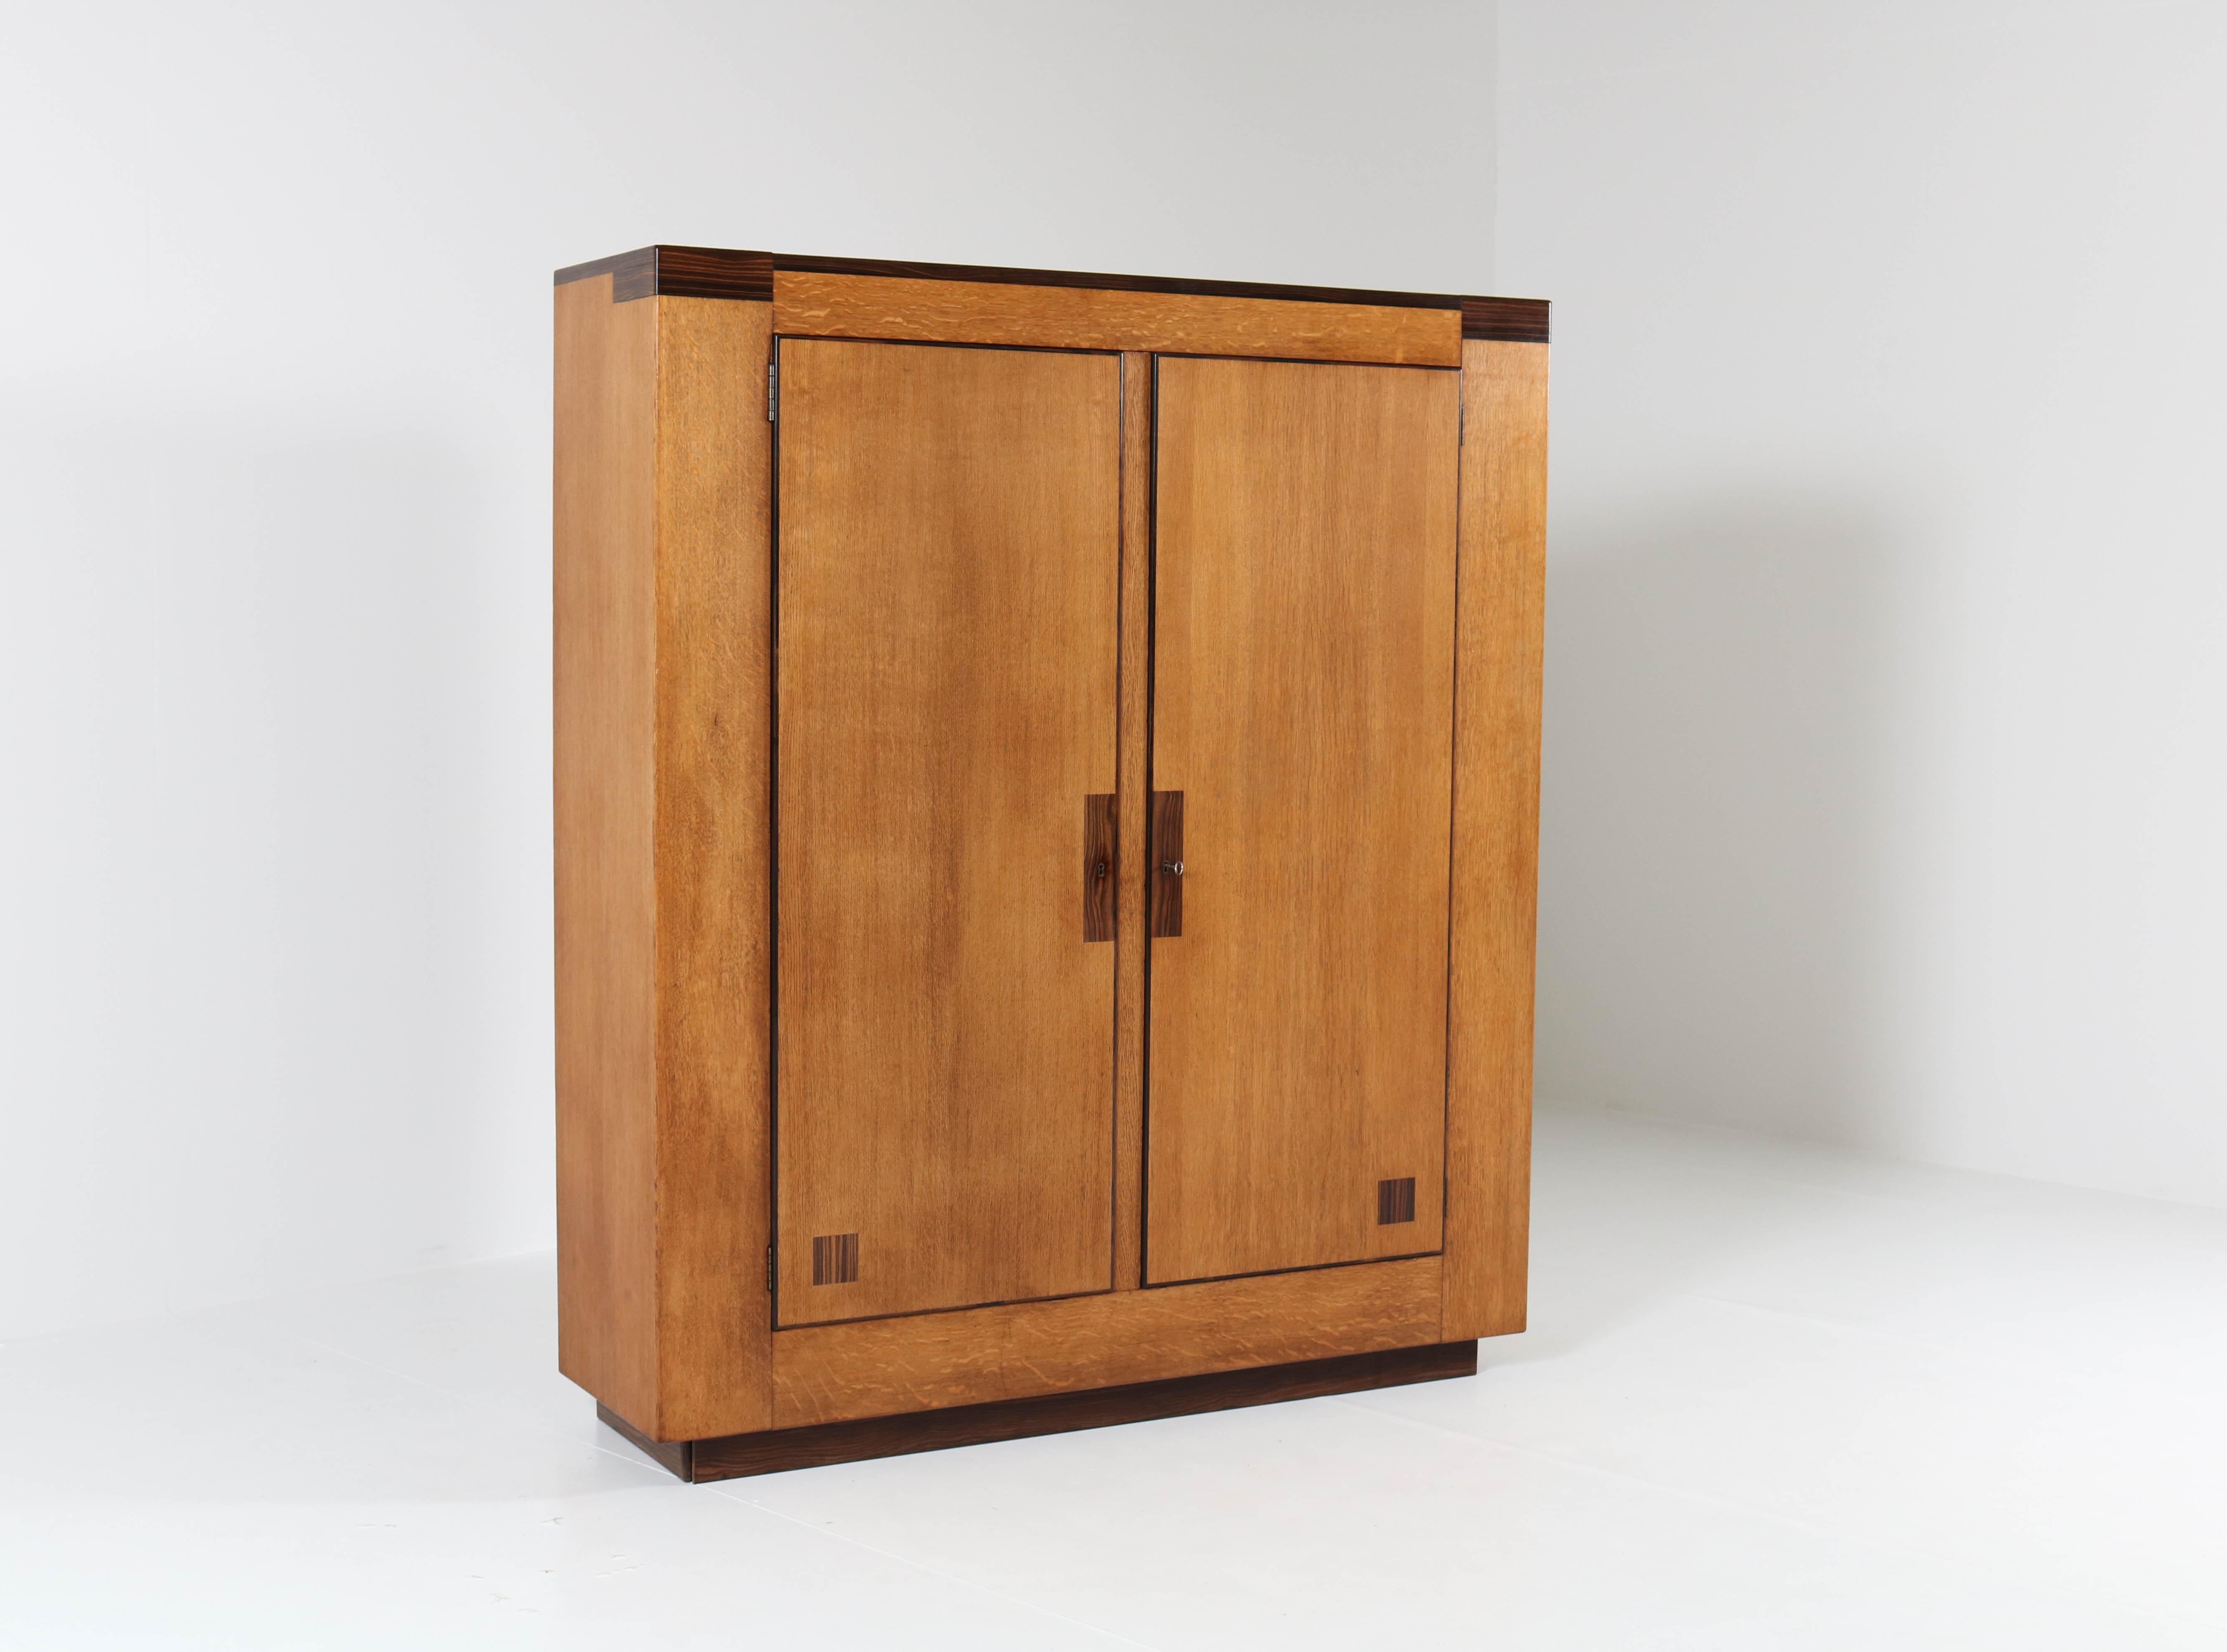 Offered by Amsterdam Modernism:
Magnificent and very rare Art Deco Haagse School armoir or wardrobe.
Design by Anton Lucas Leiden.
Striking Dutch design from the twenties.
Oak with ebony Macassar.
This stunning piece can be dismantled for easy